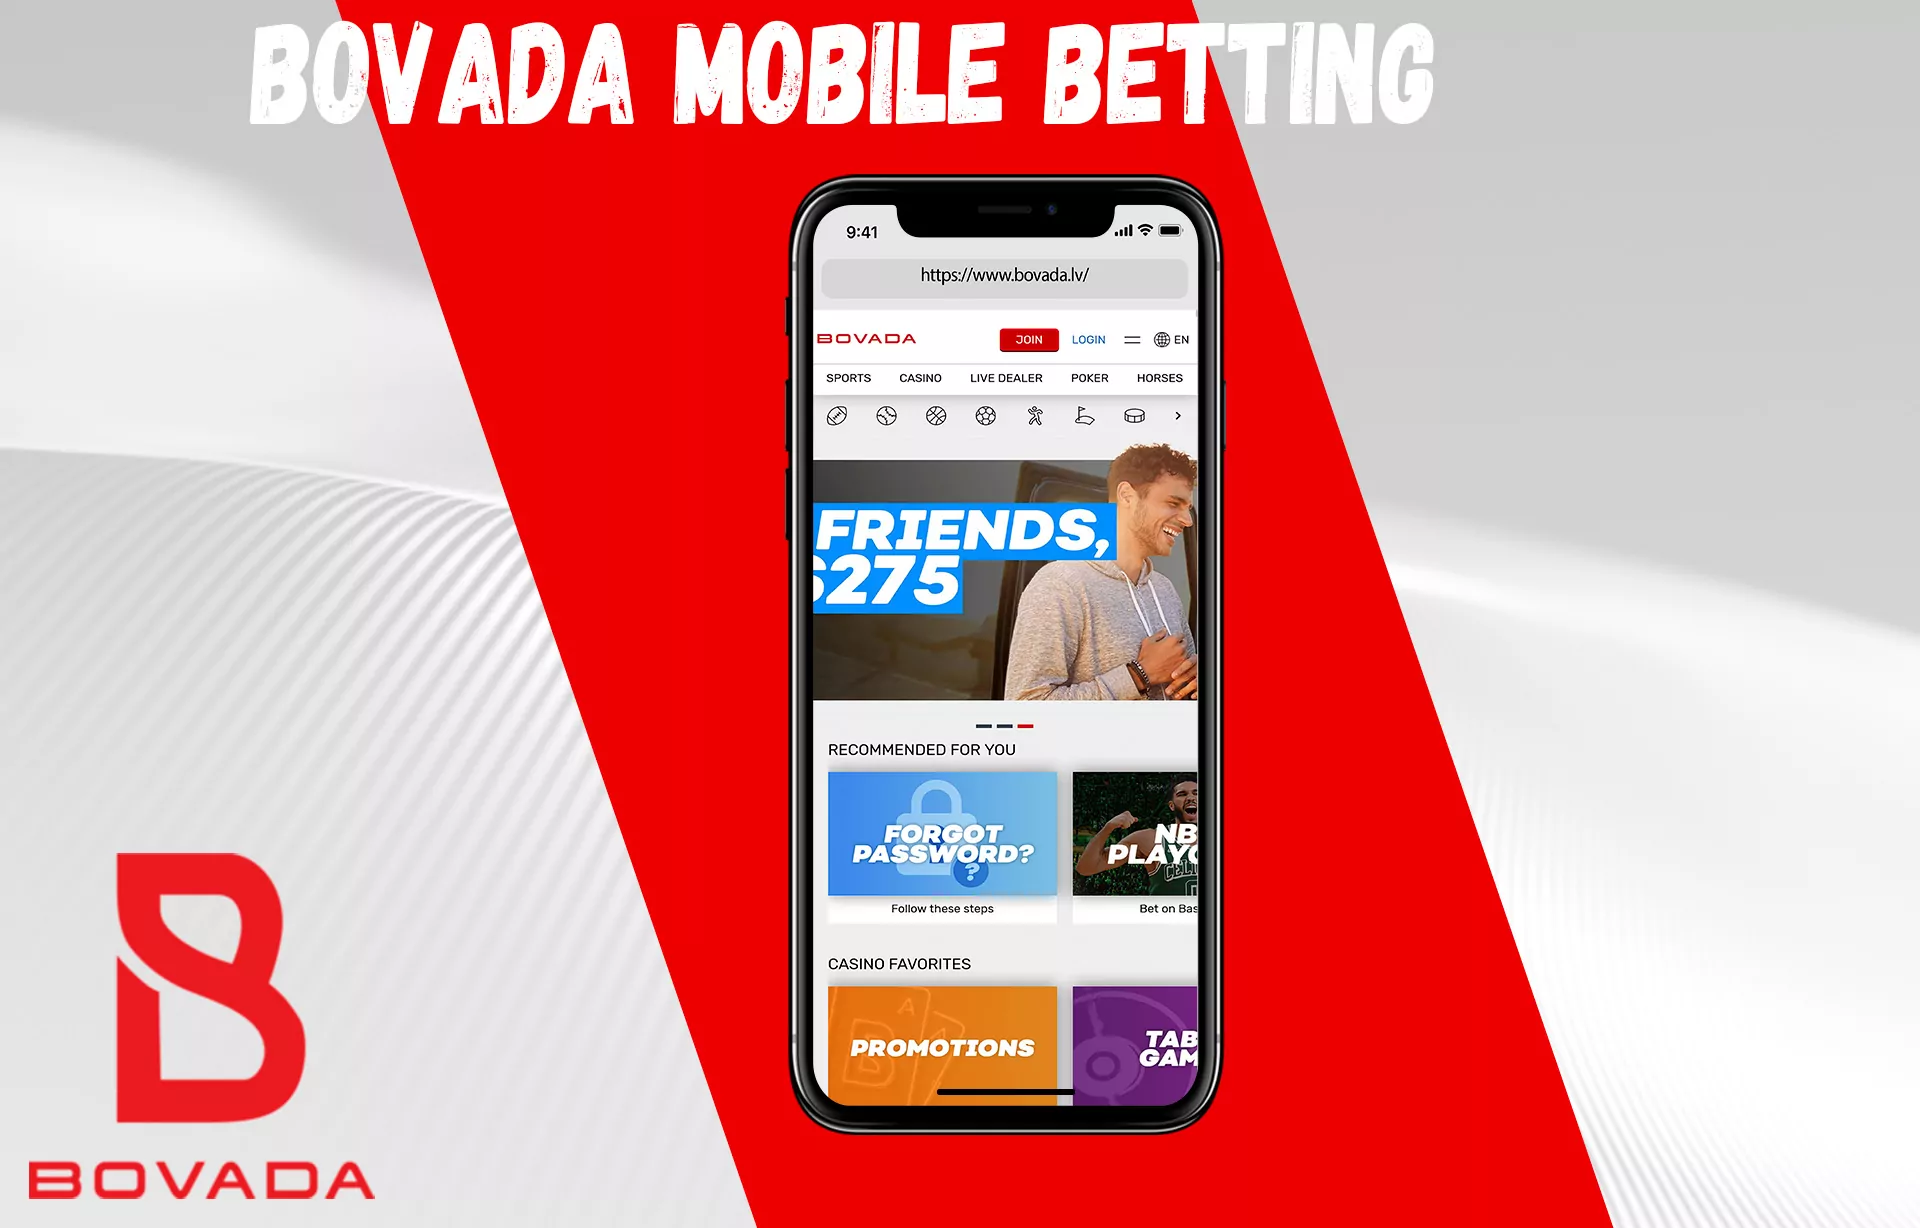 Bovada can be used without installing an app, just open your mobile browser and search for a bookmaker.